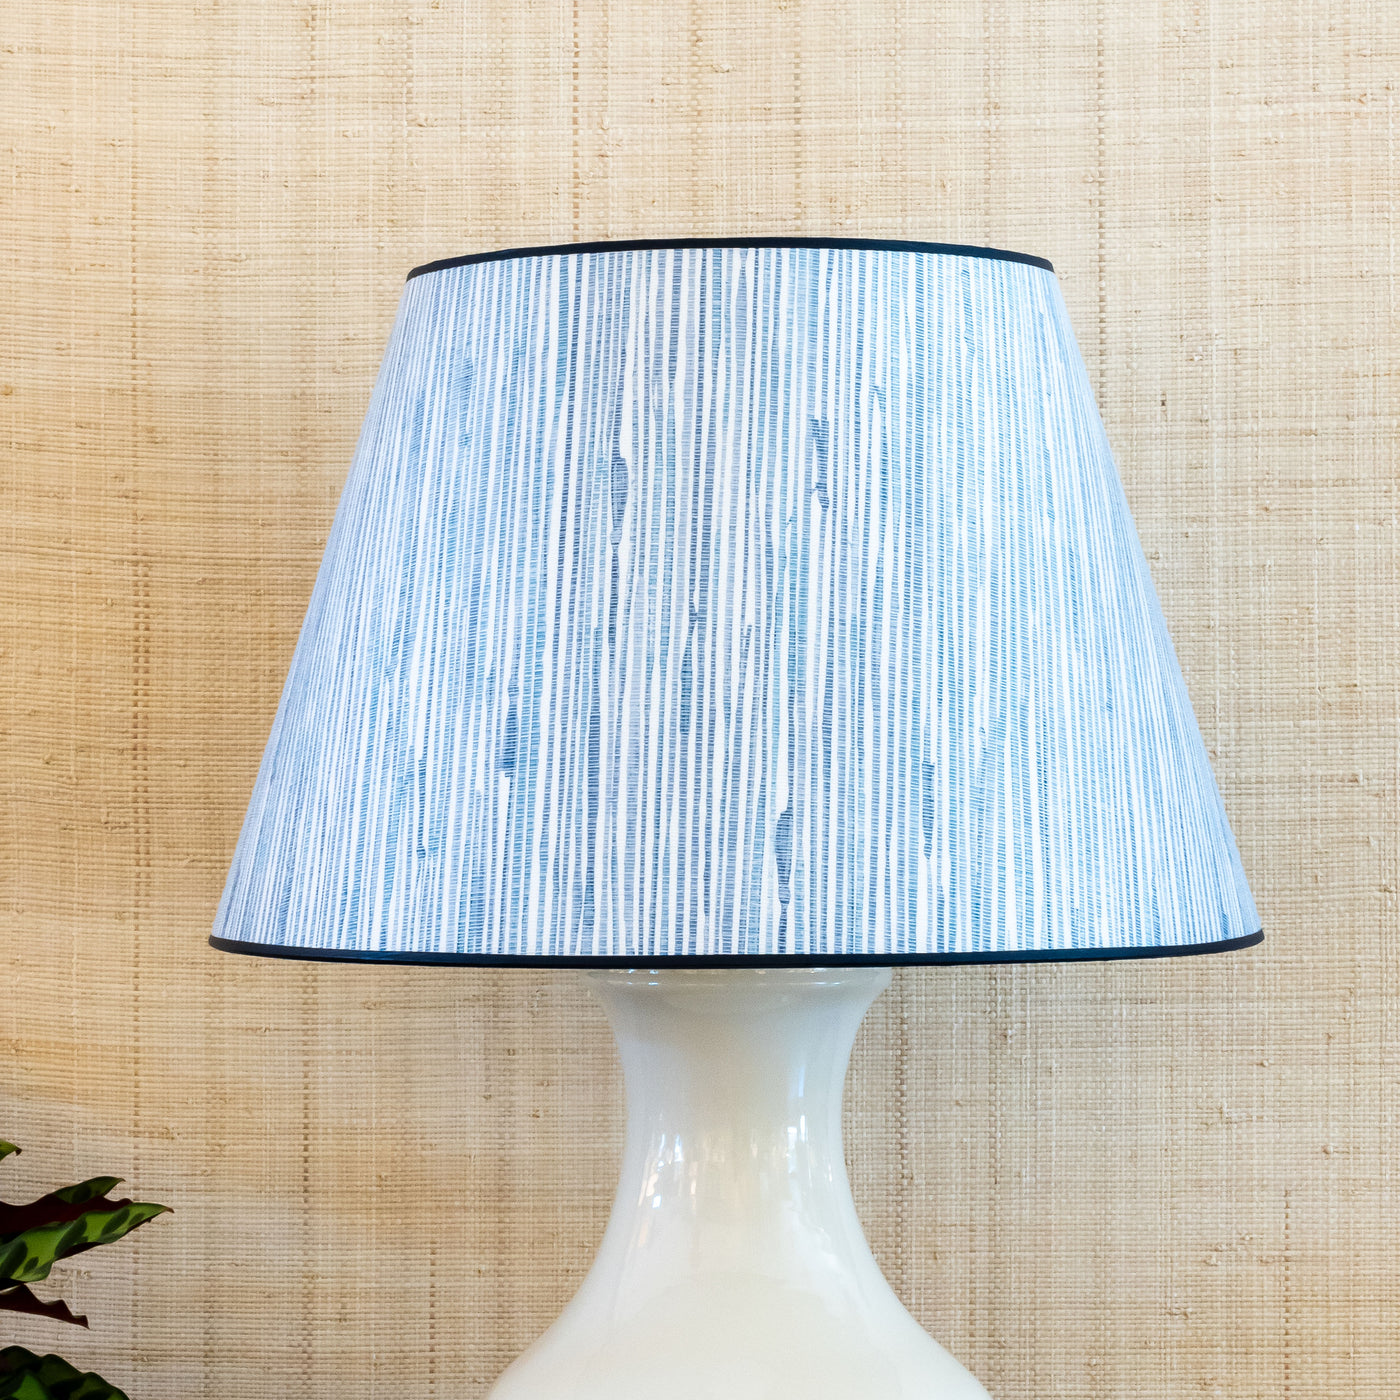 New Grasscloth Lampshade in Blue